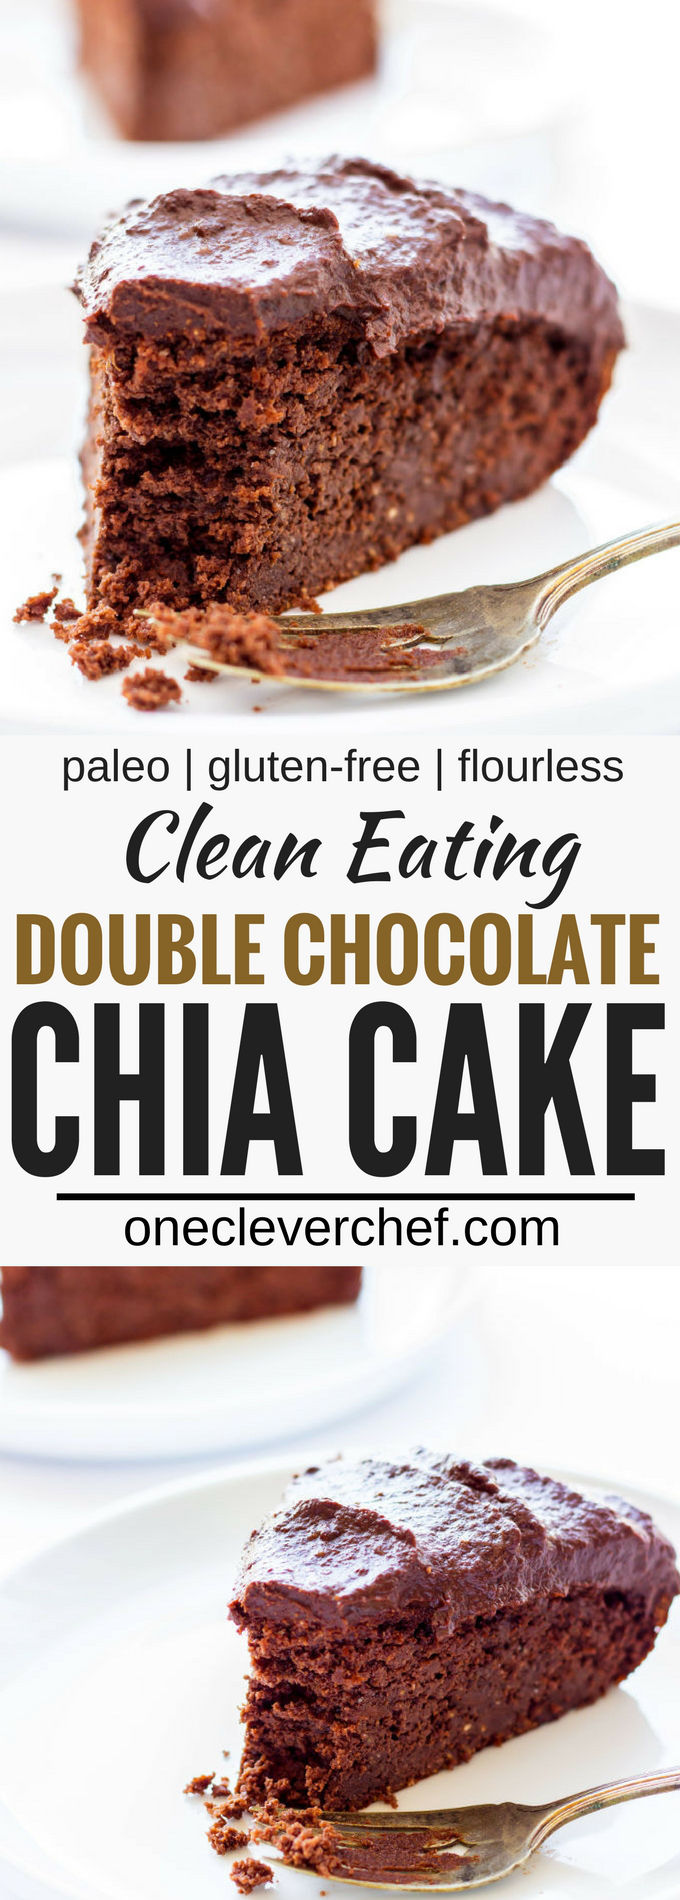 This healthy and decadent double chocolate chia cake is made of 100% real food ingredients. It is extra moist, rich and bursting with chocolatey flavor. Easy to make, this delicious and versatile dessert requires only one bowl and very few preparation steps. It is also paleo, gluten-free, eggless and flourless making, it the perfect guilt-free dessert or snack. With added protein, this recipe is also perfect as a post-workout treat. | www.onecleverchef.com